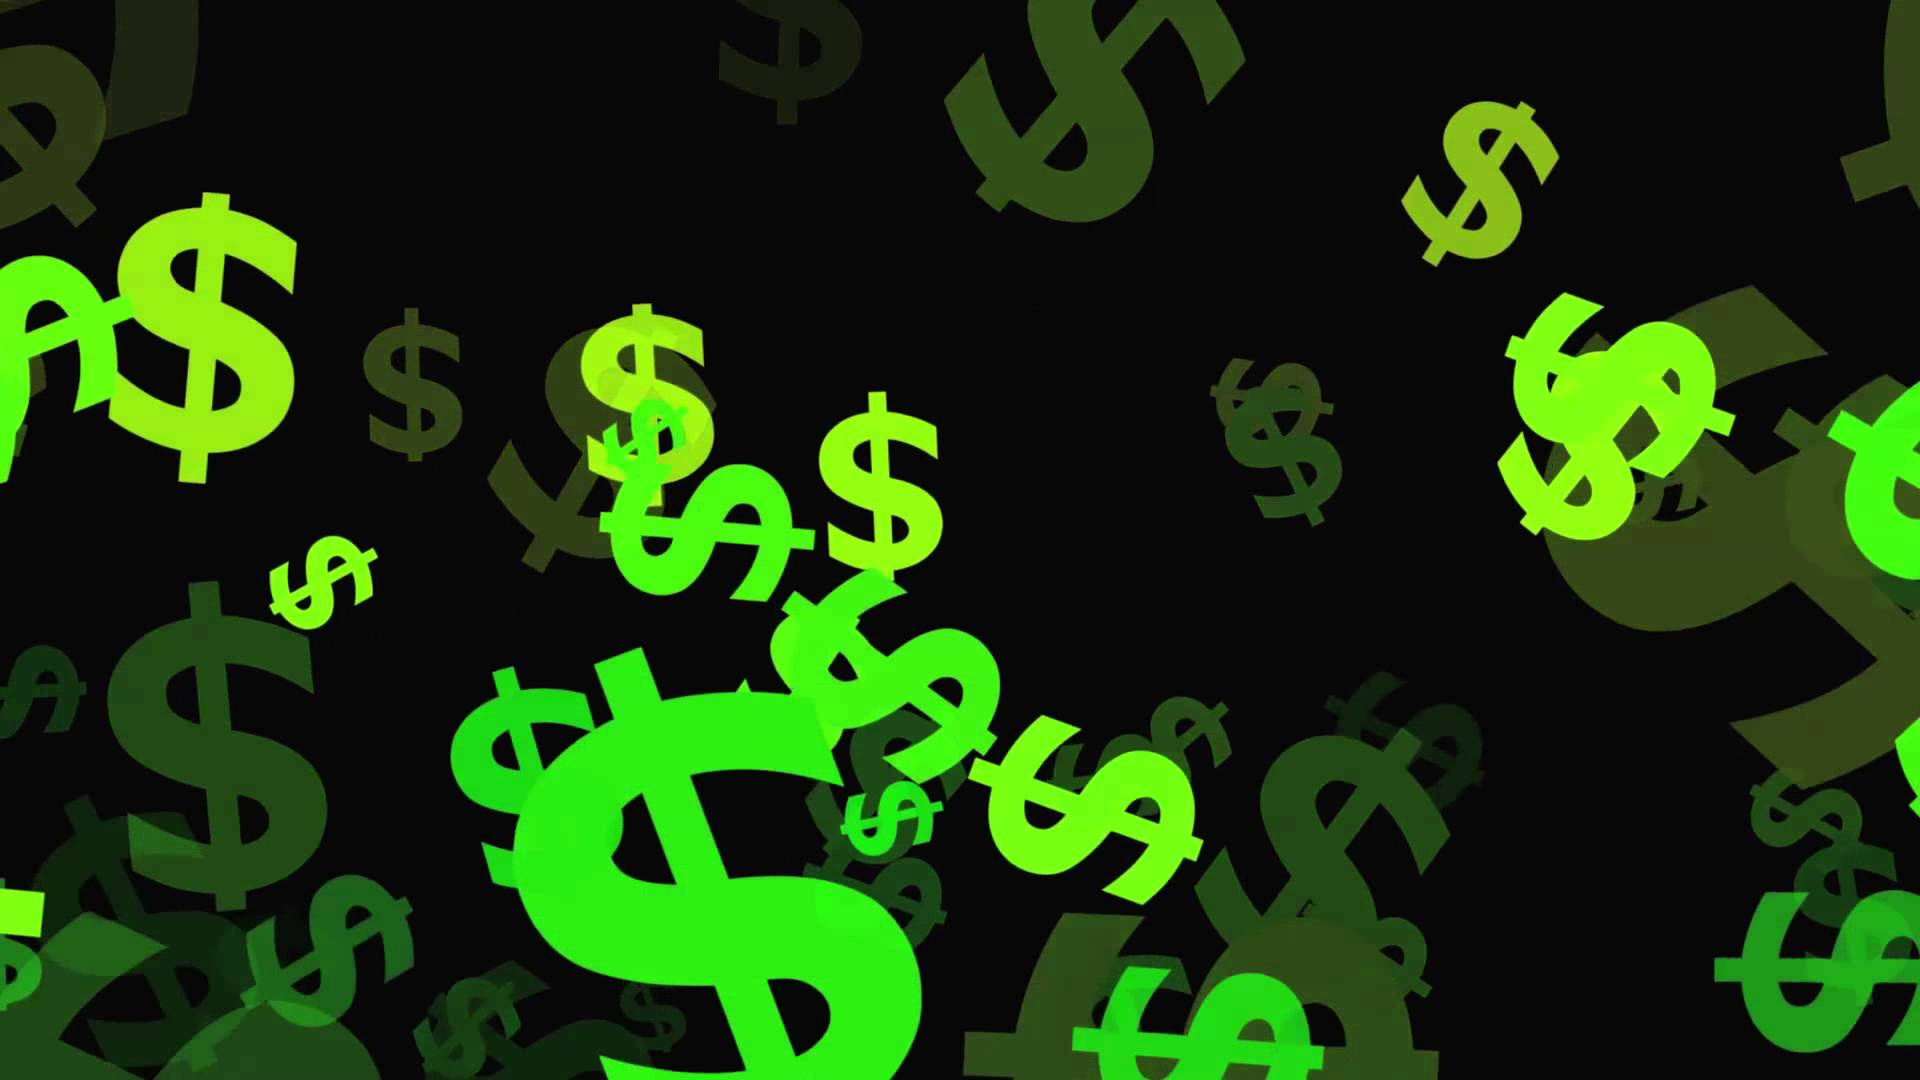 For Dollar Signs Background Displaying Image